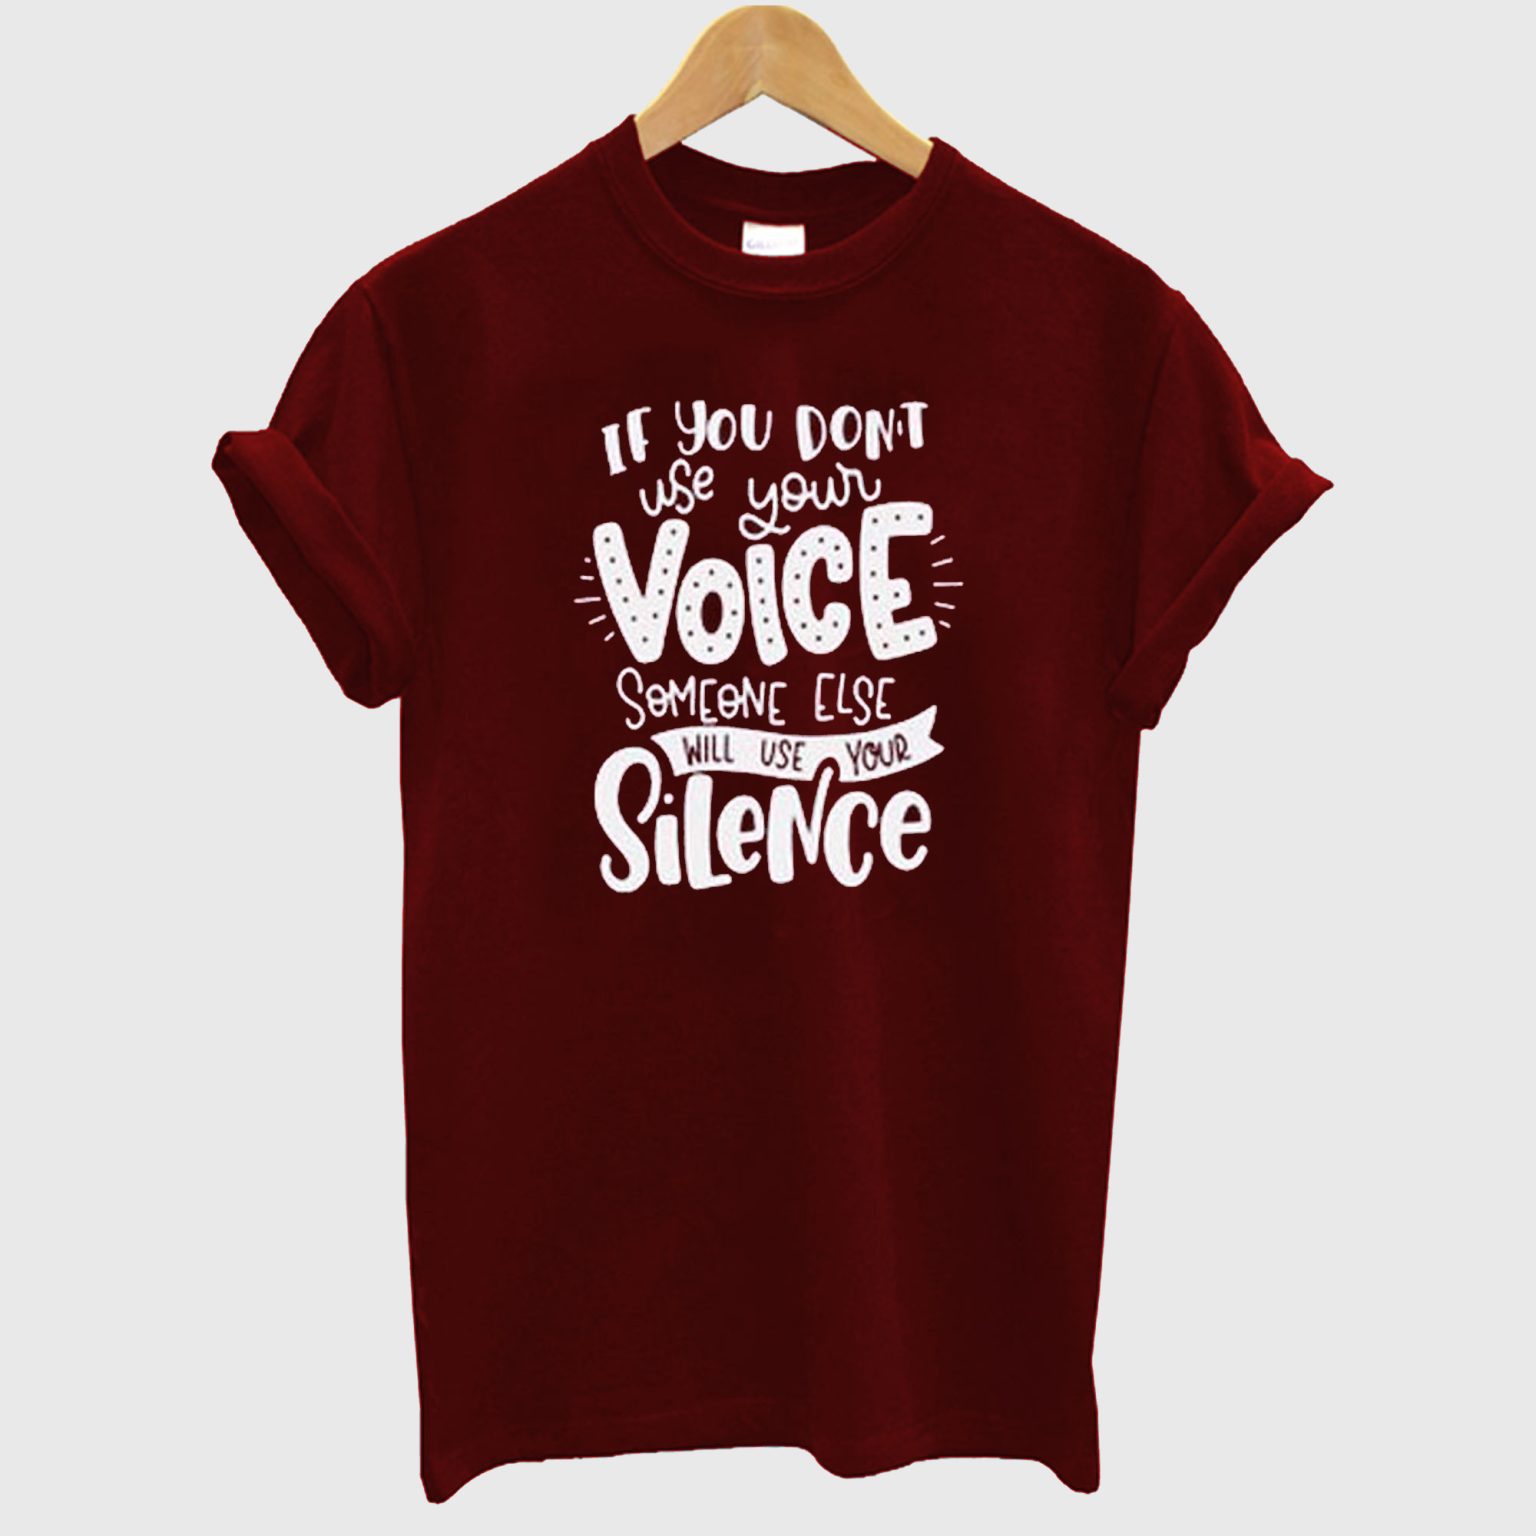 If You Don't Use Your Voice Someone Else Will Use Your Silence T shirt